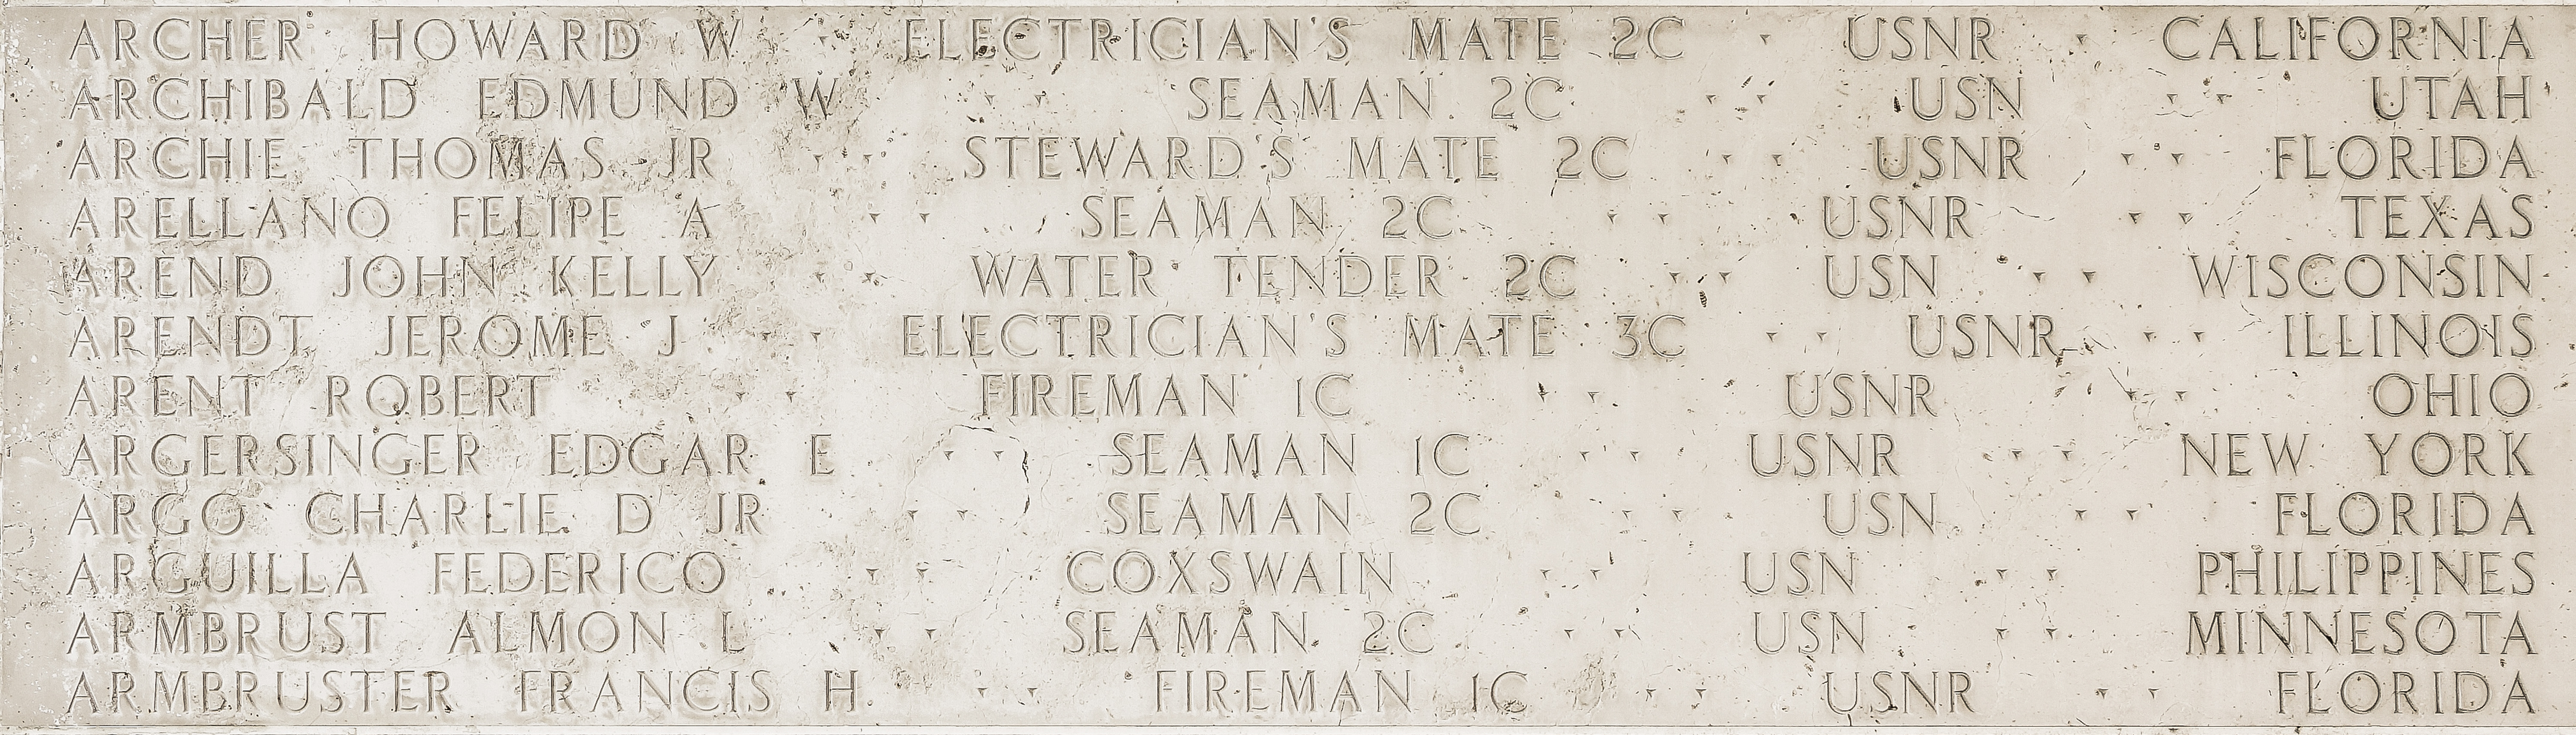 Howard W. Archer, Electrician's Mate Second Class